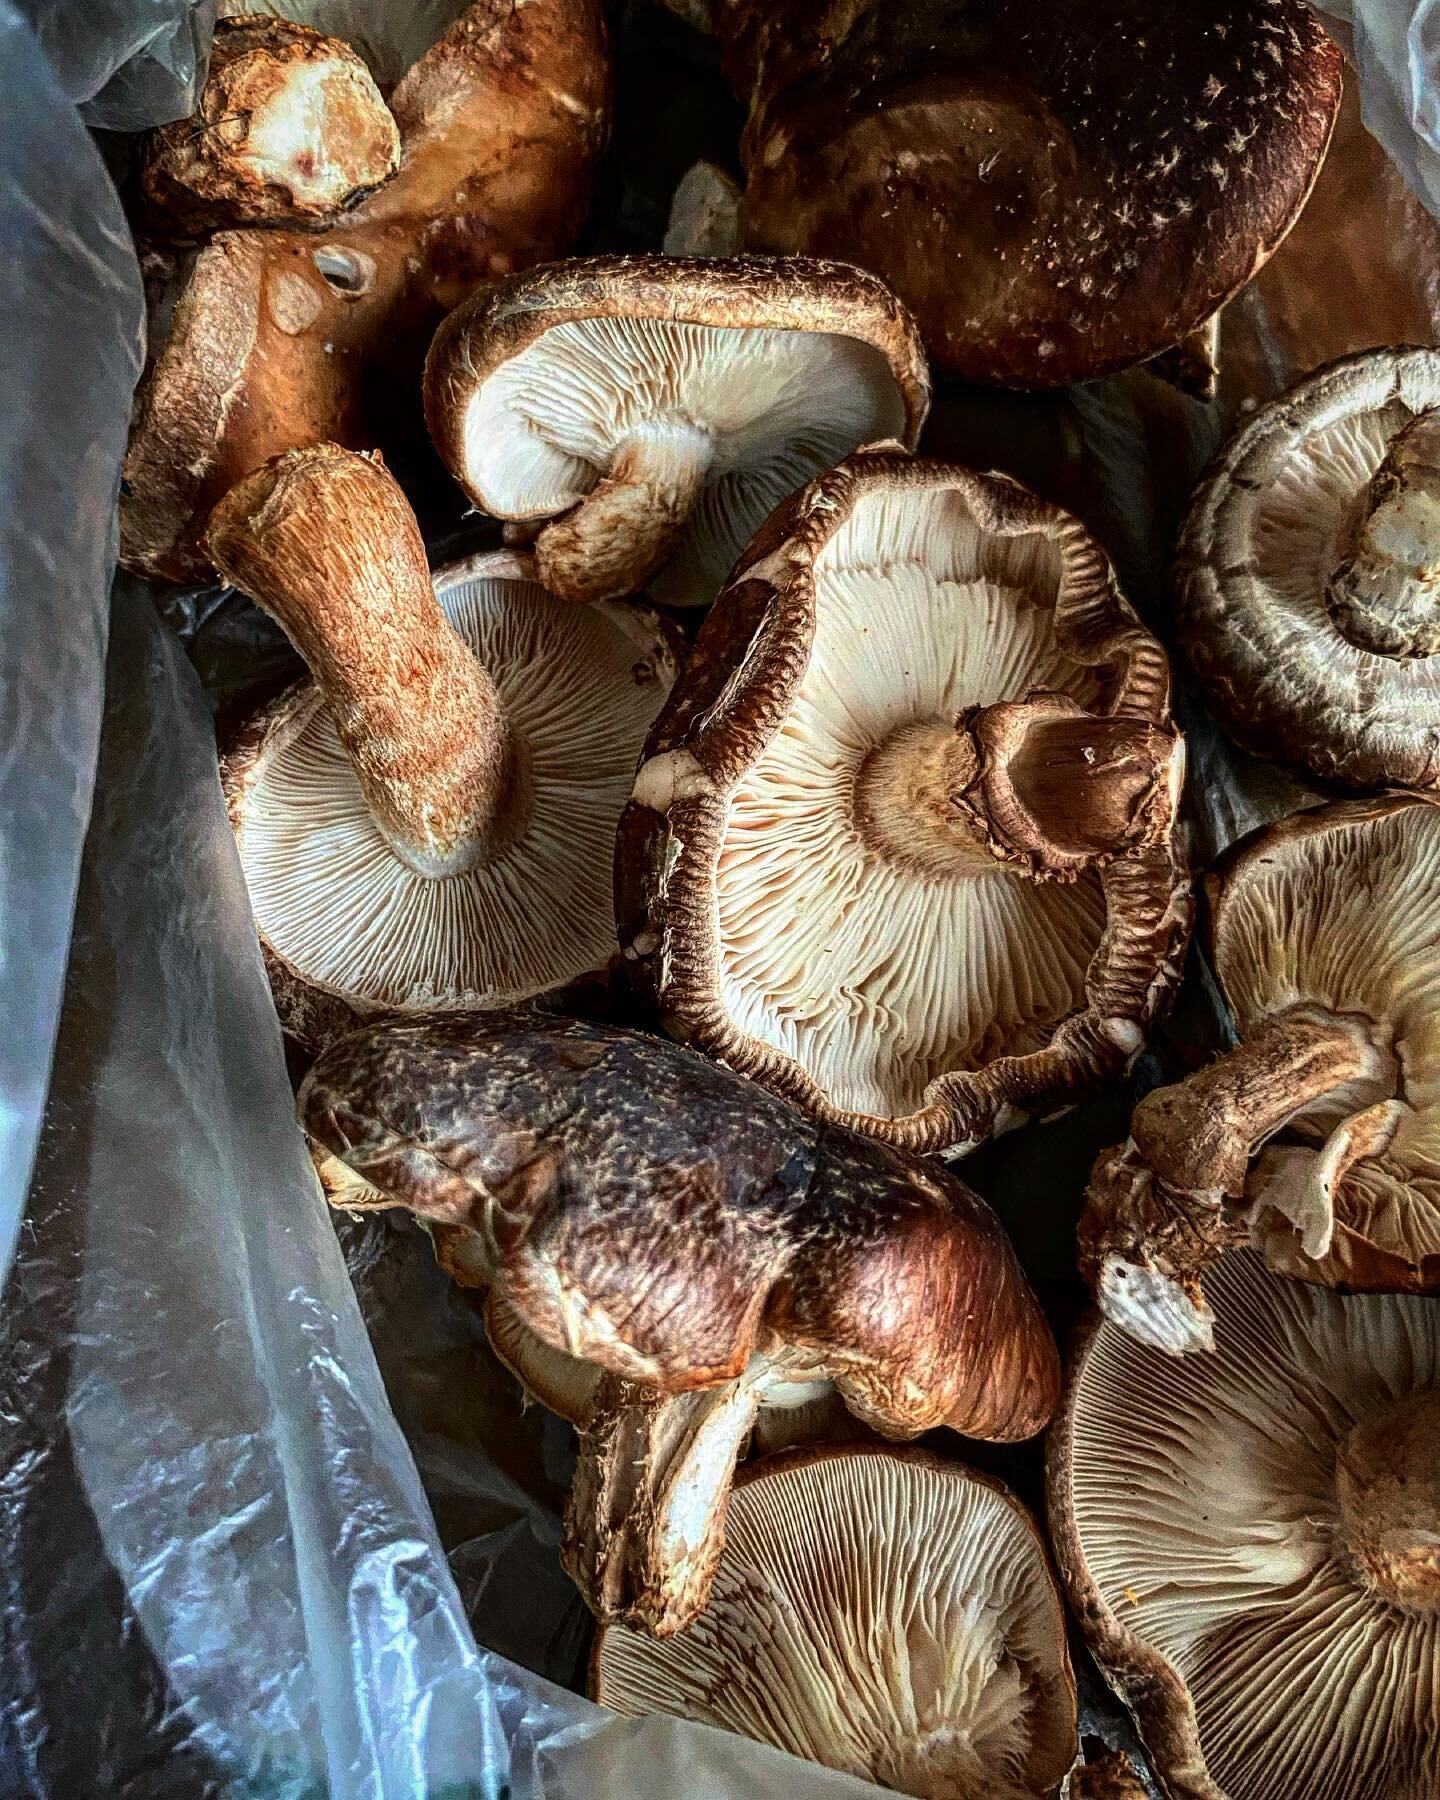 Shiitake season has begun, harvested a couple pounds of freshies so far. The ramps patch is looking brilliant too, and spreading.

#fungi #fungiphotography #shiitake #shiitakemushrooms #myco #mycoculture #mycology #garden #gardening #forestgarden #fo